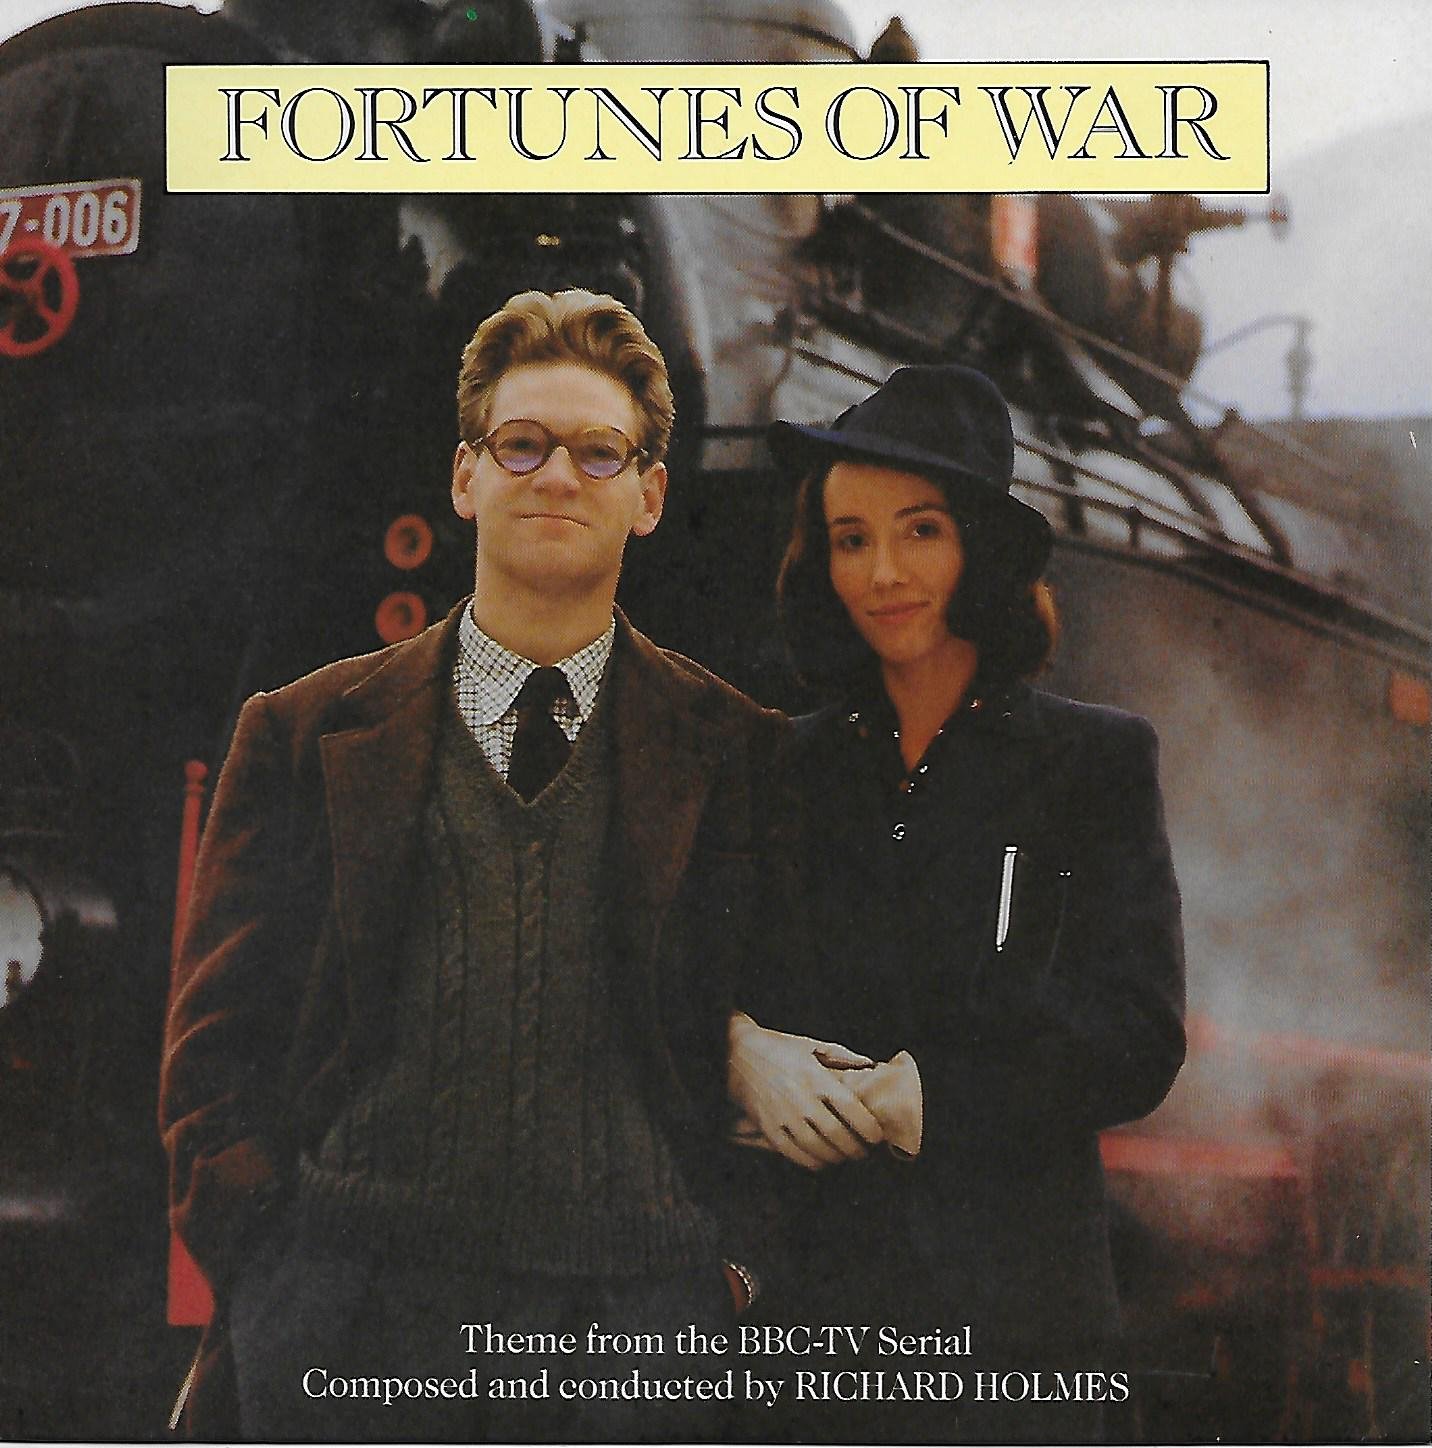 Picture of Fortunes of war by artist Richard Holmes / Pavel's Rumanian Ensemble / The United Kingdom Symphony Orchestra from the BBC singles - Records and Tapes library